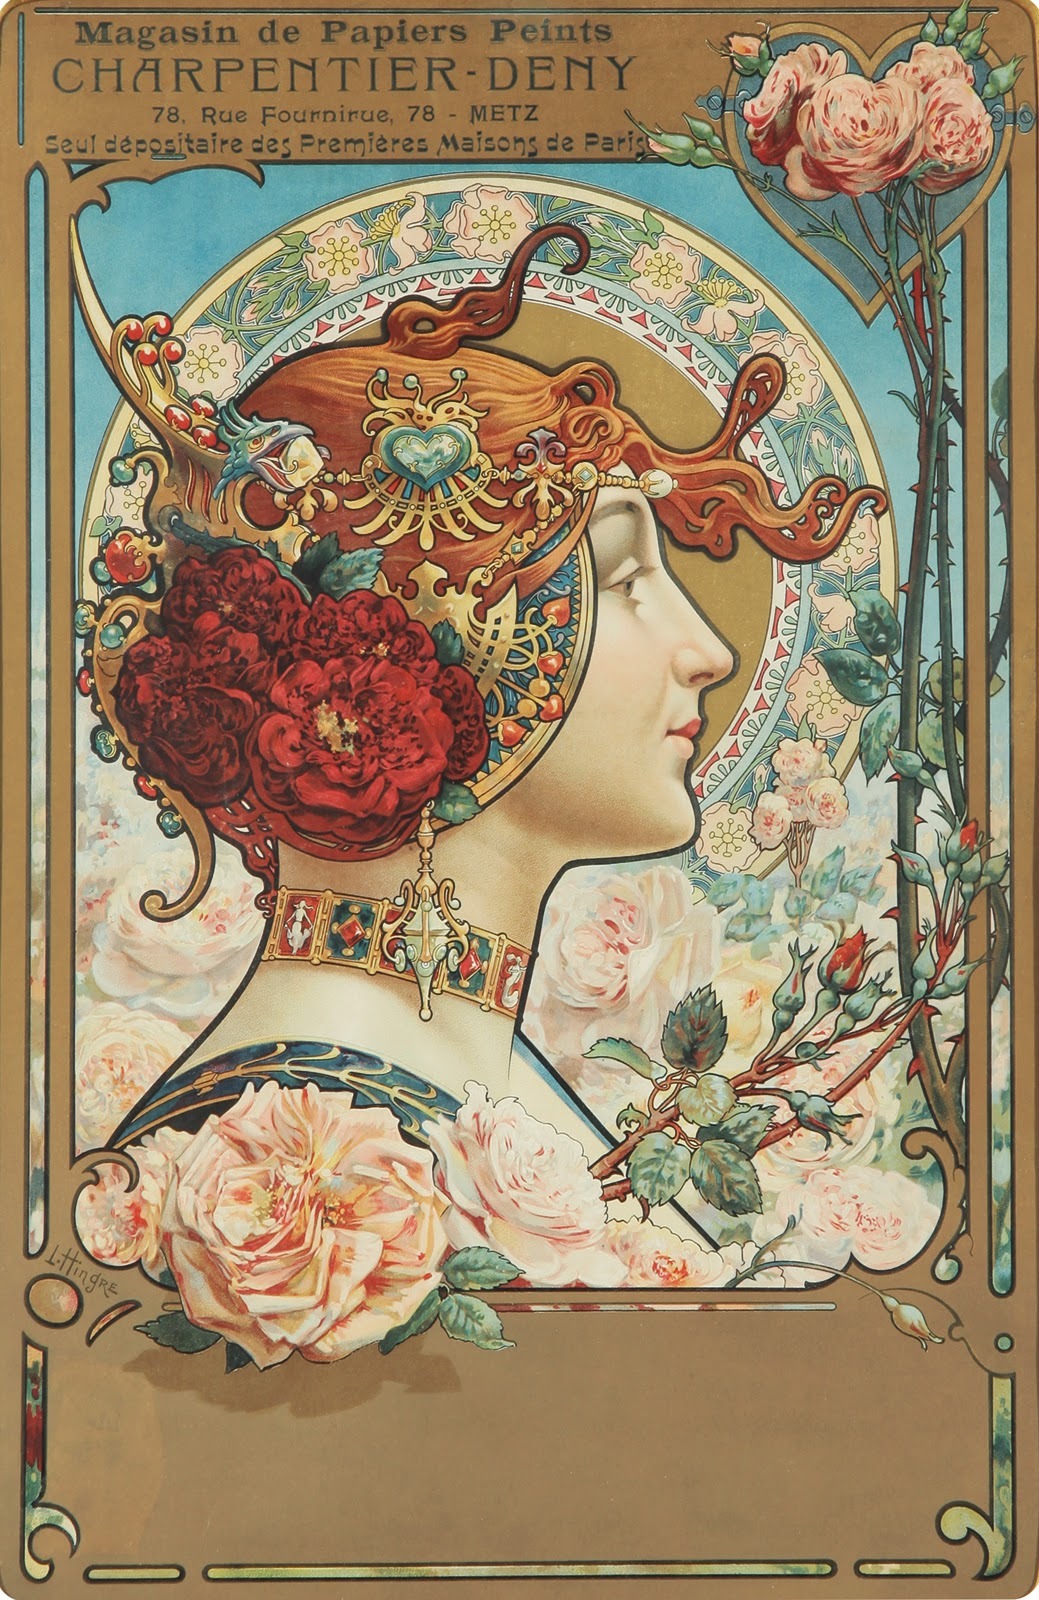 An advertisement for a wallpaper company (Charpentier-Deny) by Louis Théophile Hingre, 1890. Larger version.